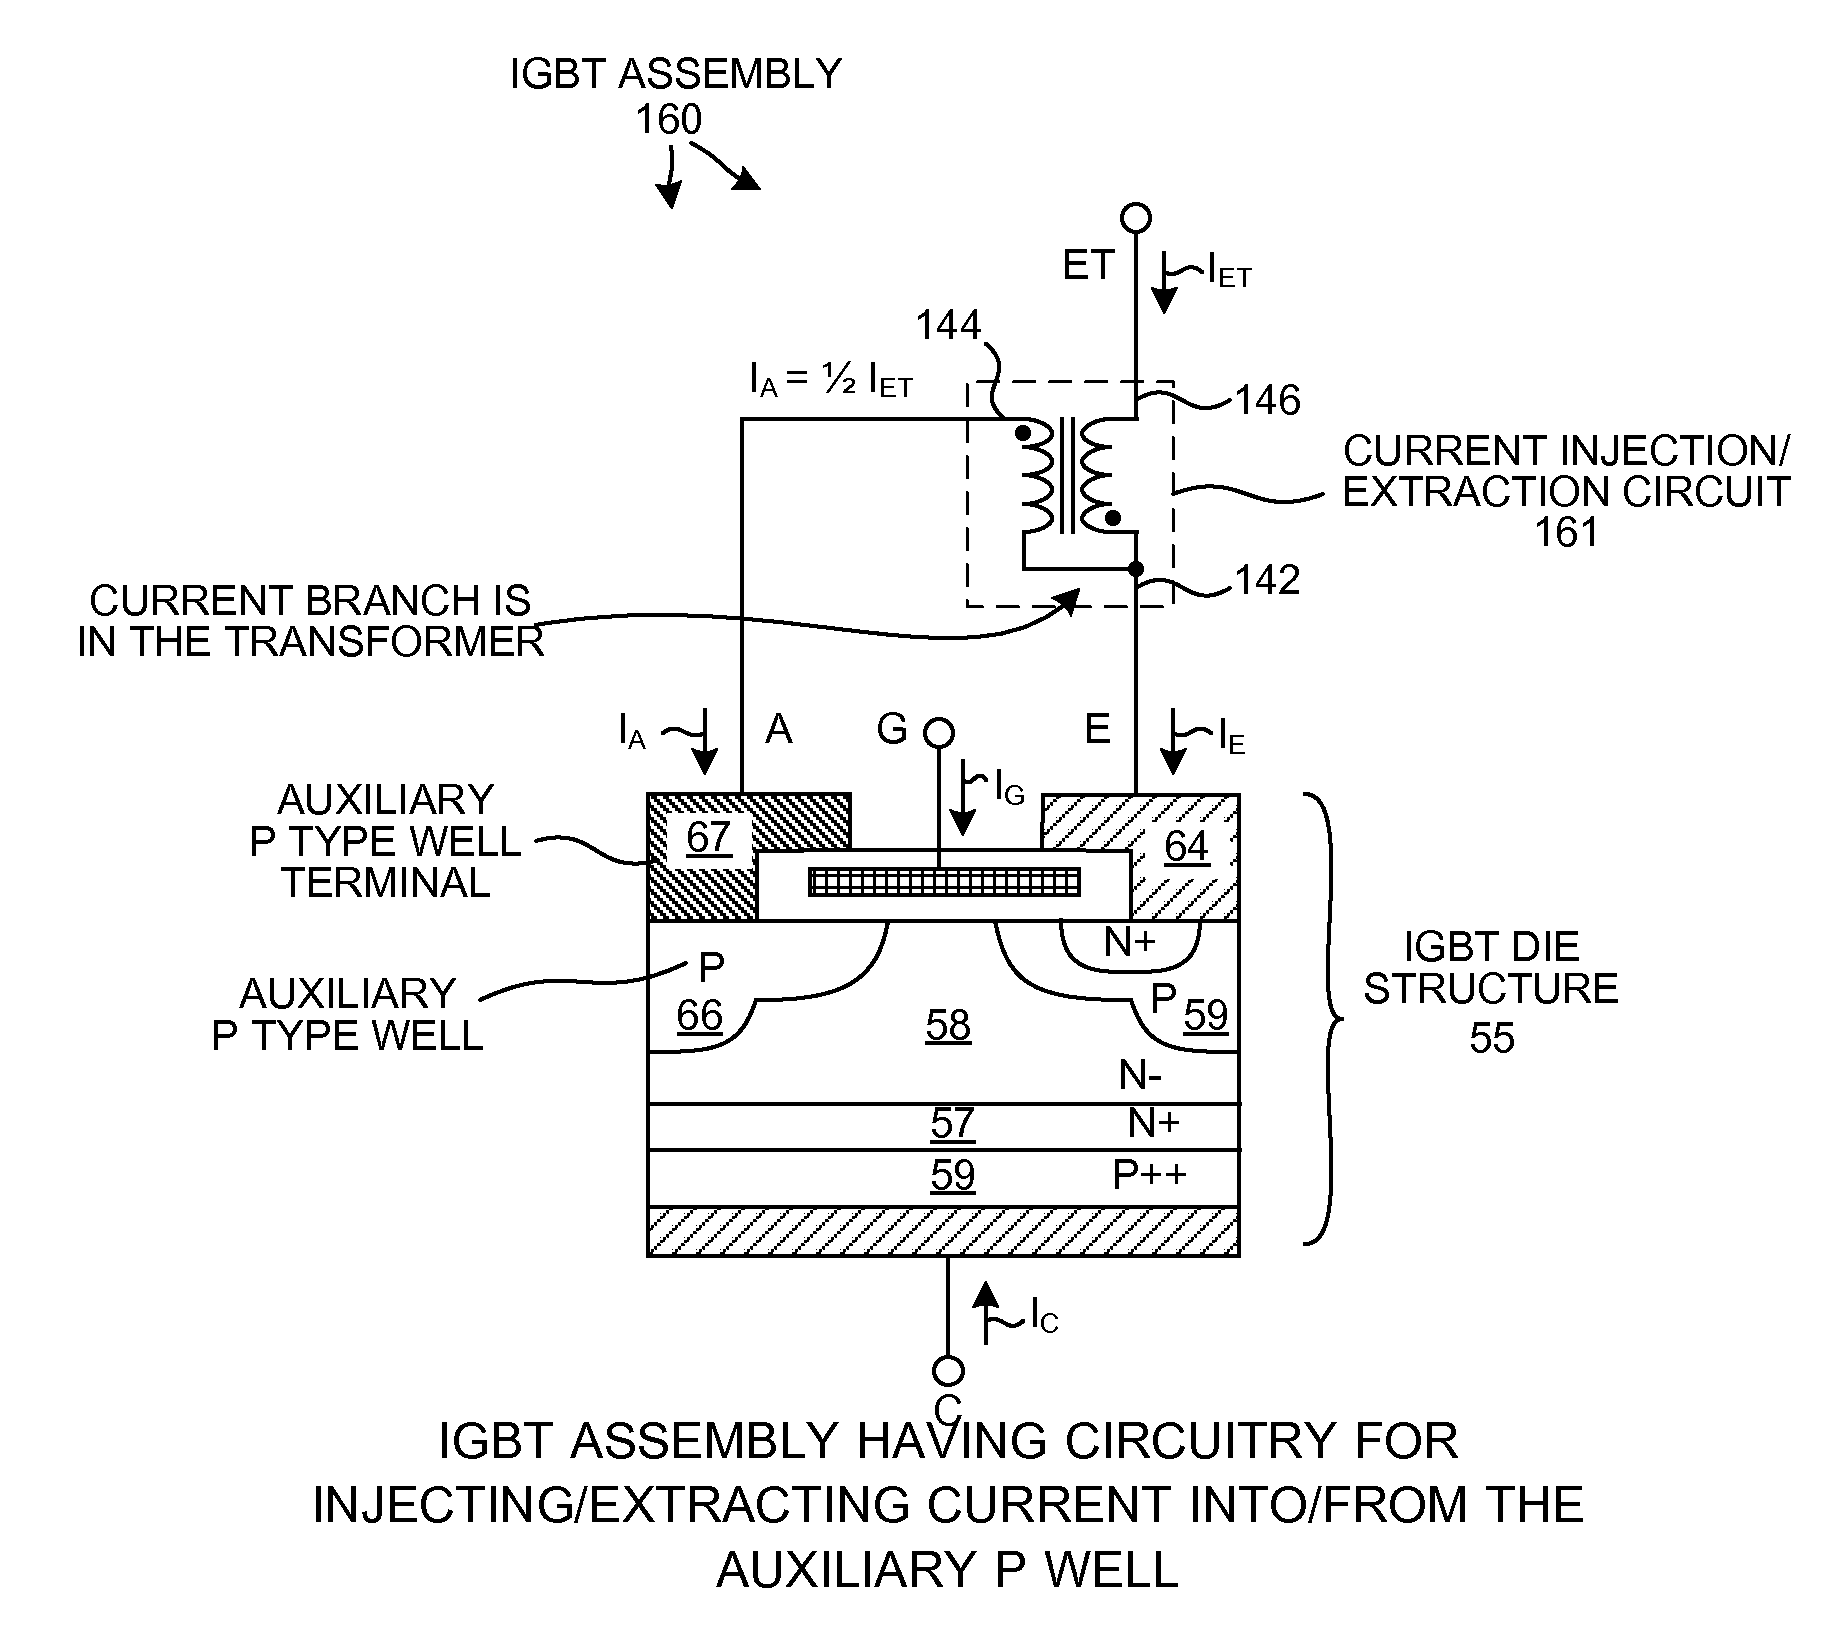 IGBT die structure with auxiliary p well terminal